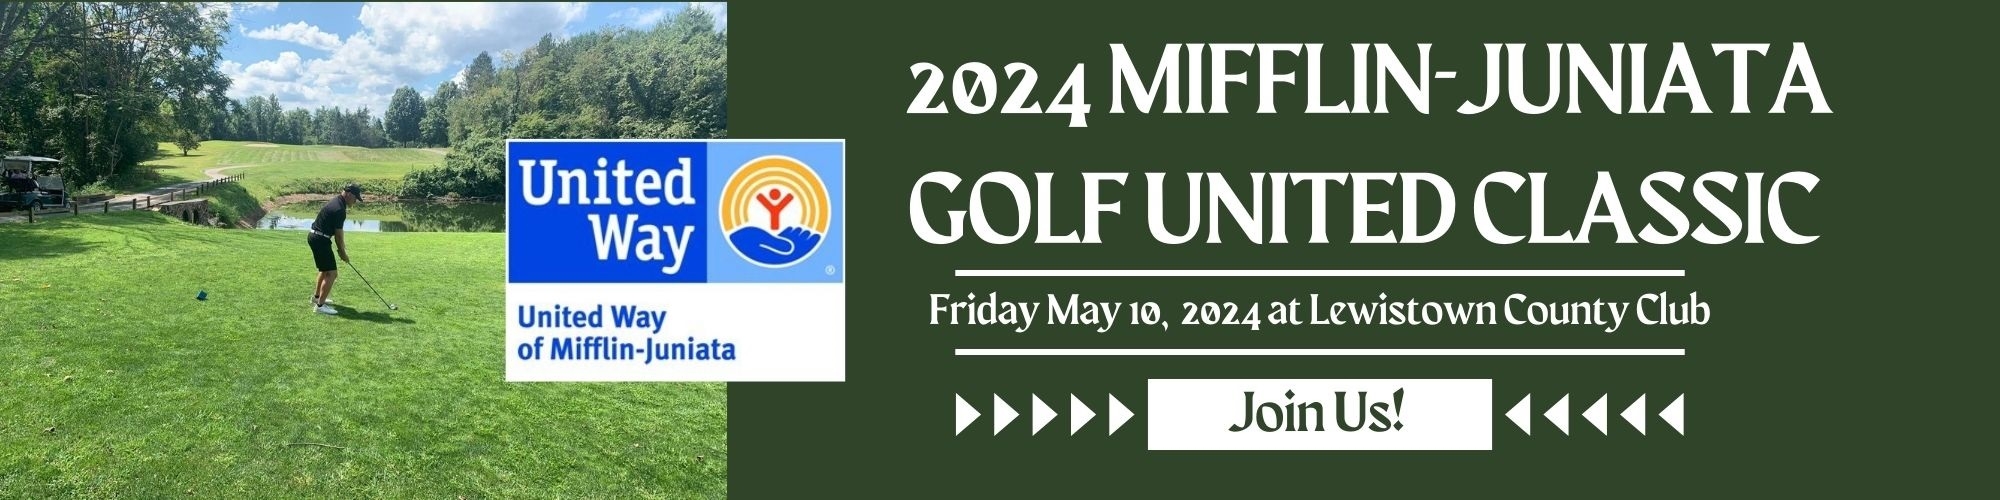 Golf Banner with Date